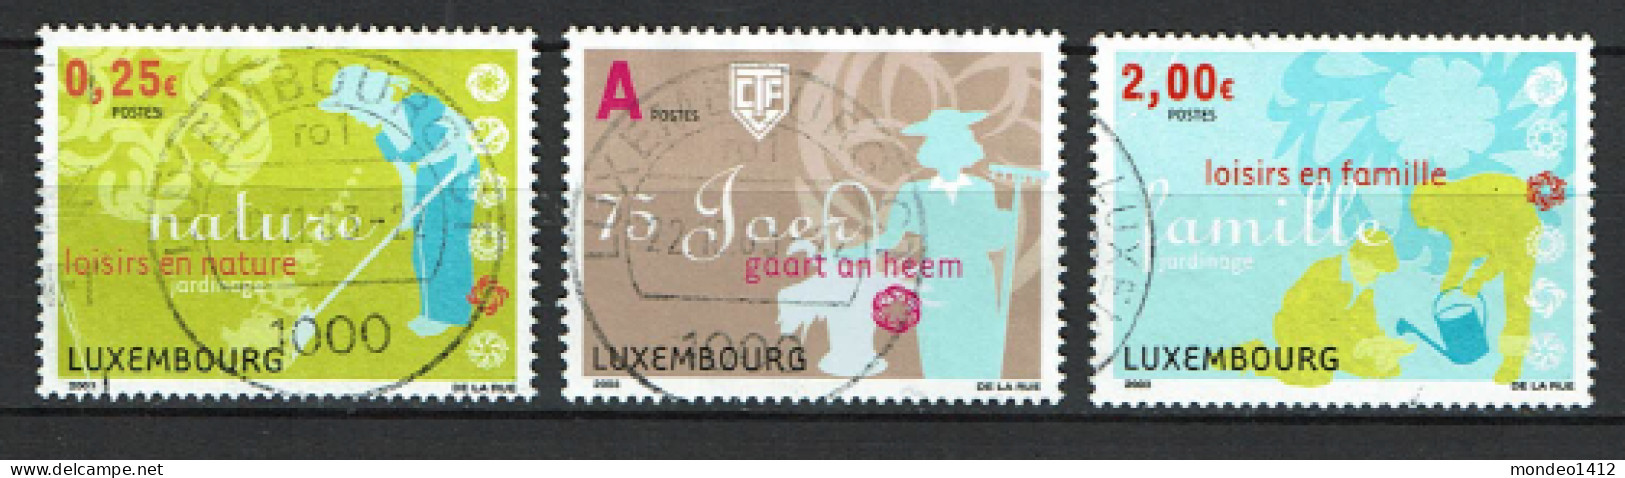 Luxembourg 2003 - YT 1561/1563 - House & Garden - Usados